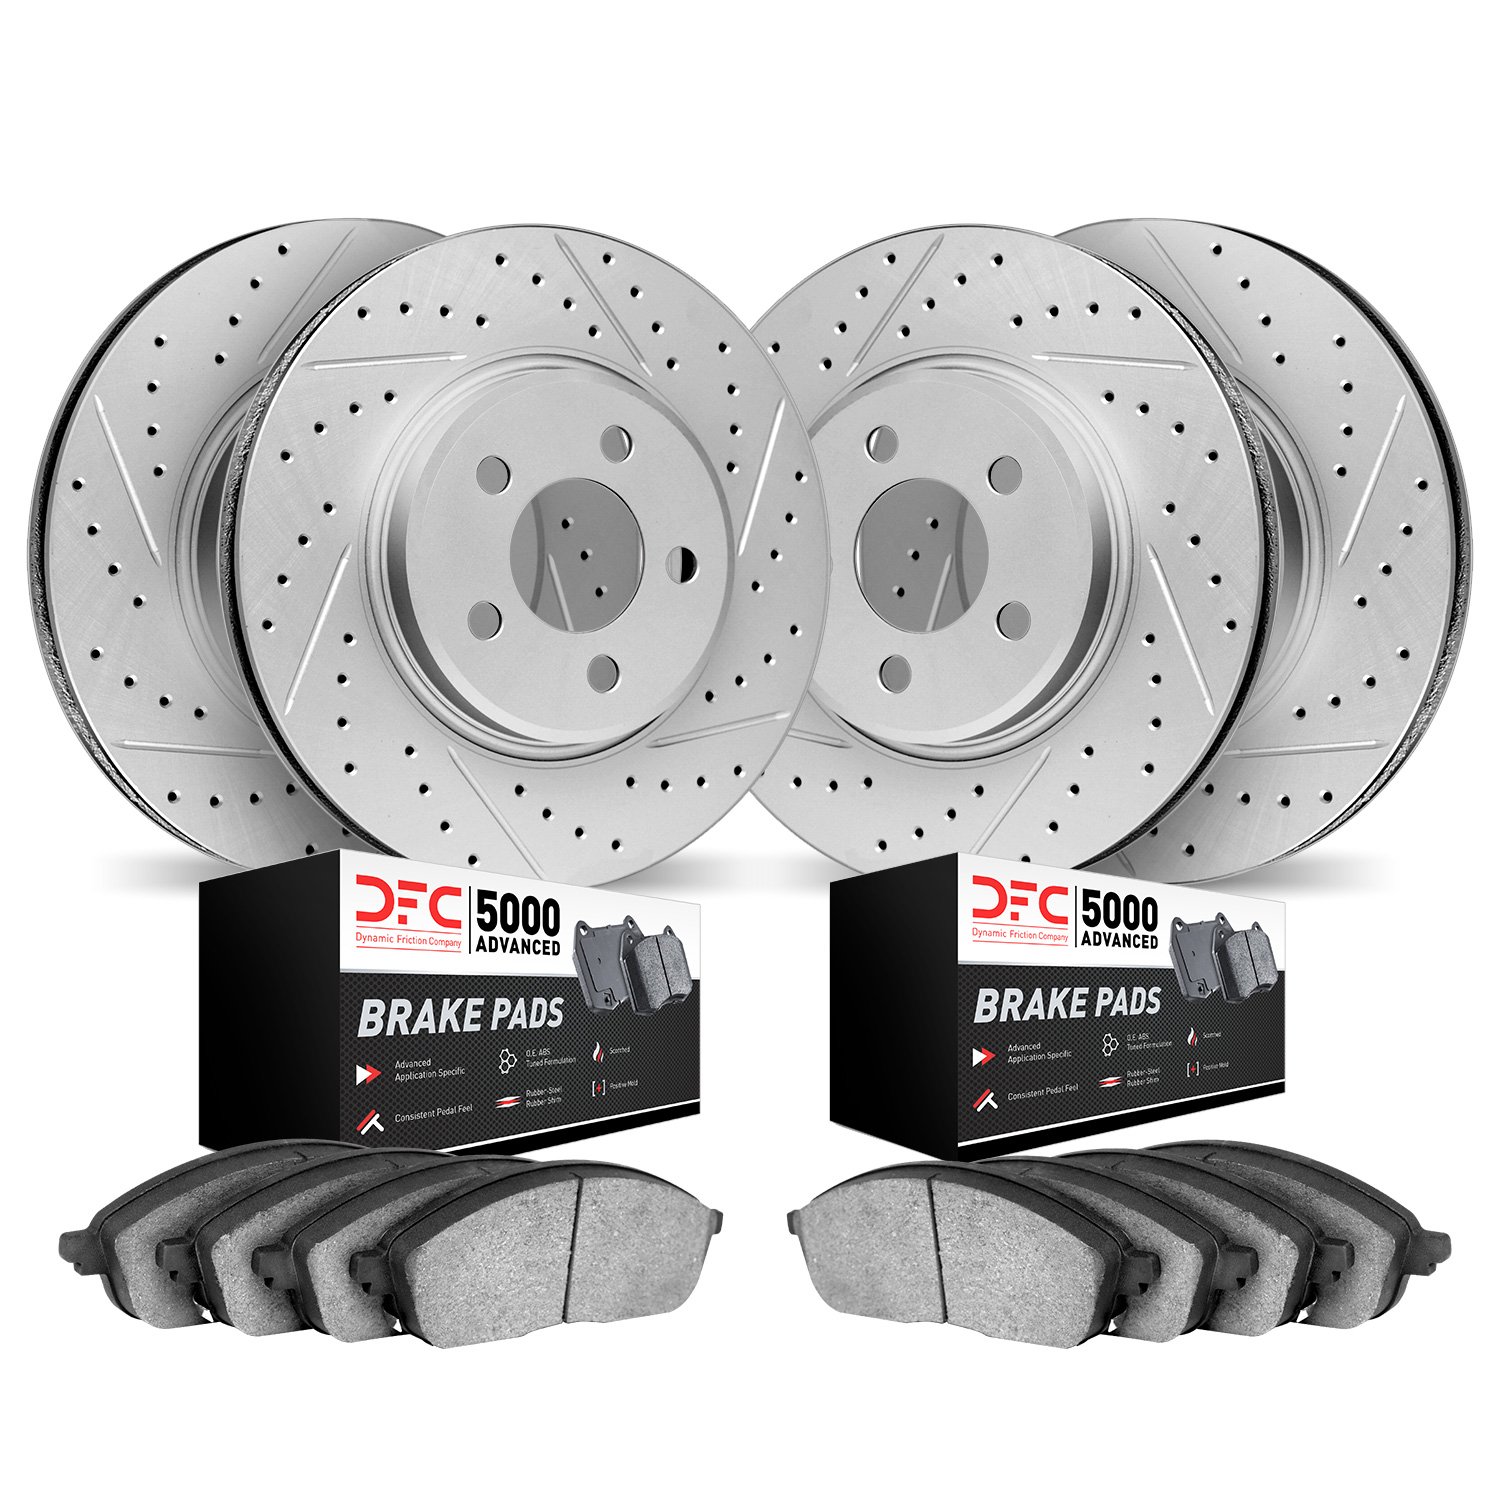 2504-54195 Geoperformance Drilled/Slotted Rotors w/5000 Advanced Brake Pads Kit, 2000-2006 Ford/Lincoln/Mercury/Mazda, Position: